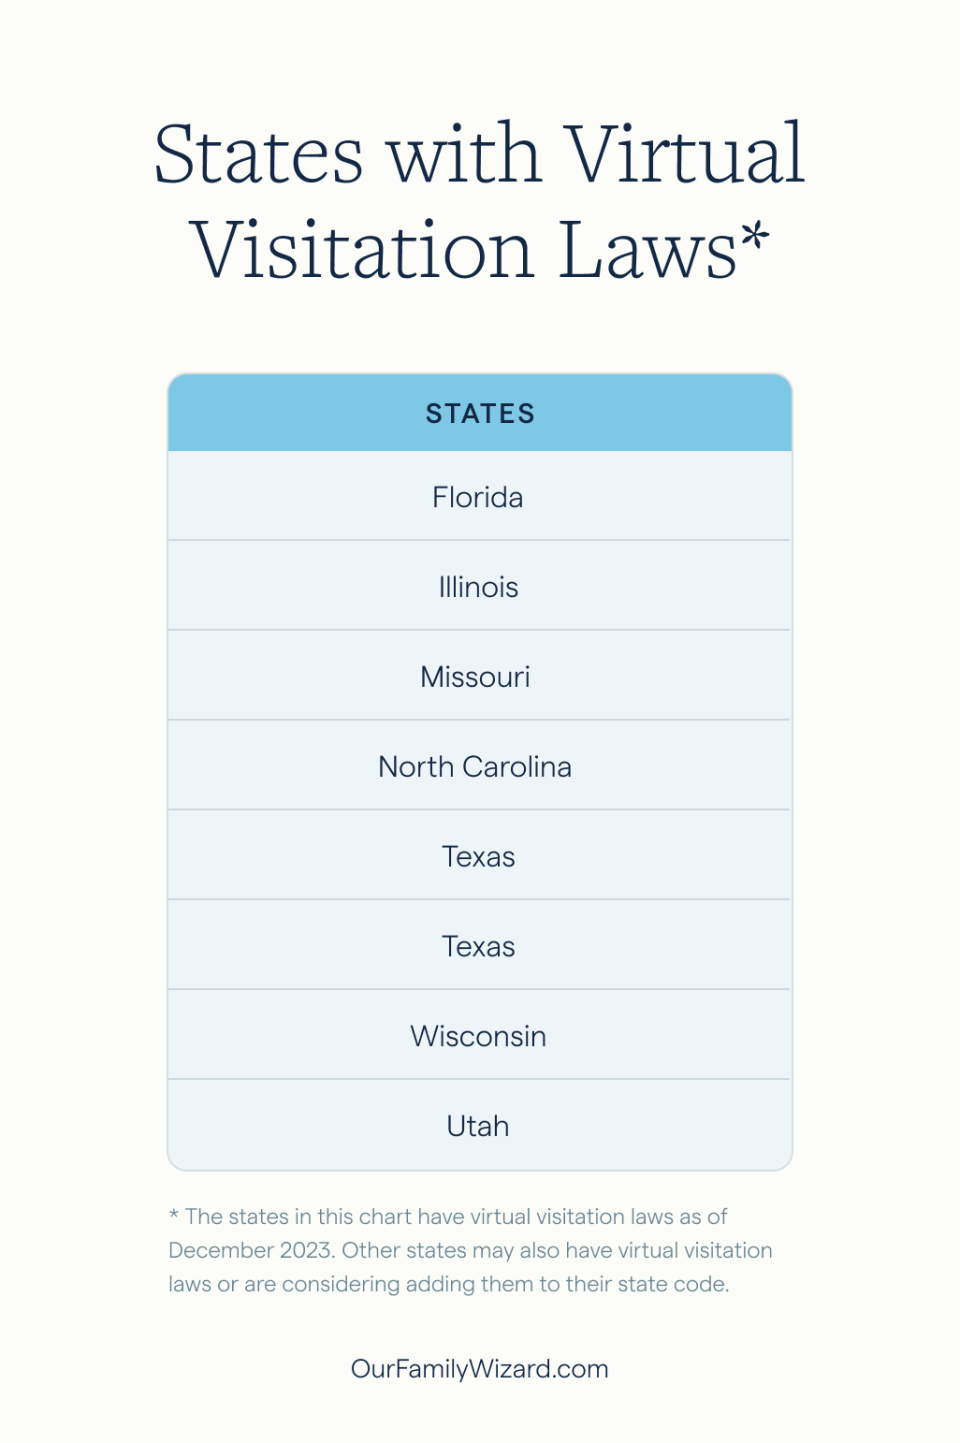 Table displaying a list of states that have virtual visitation laws as of December 2023